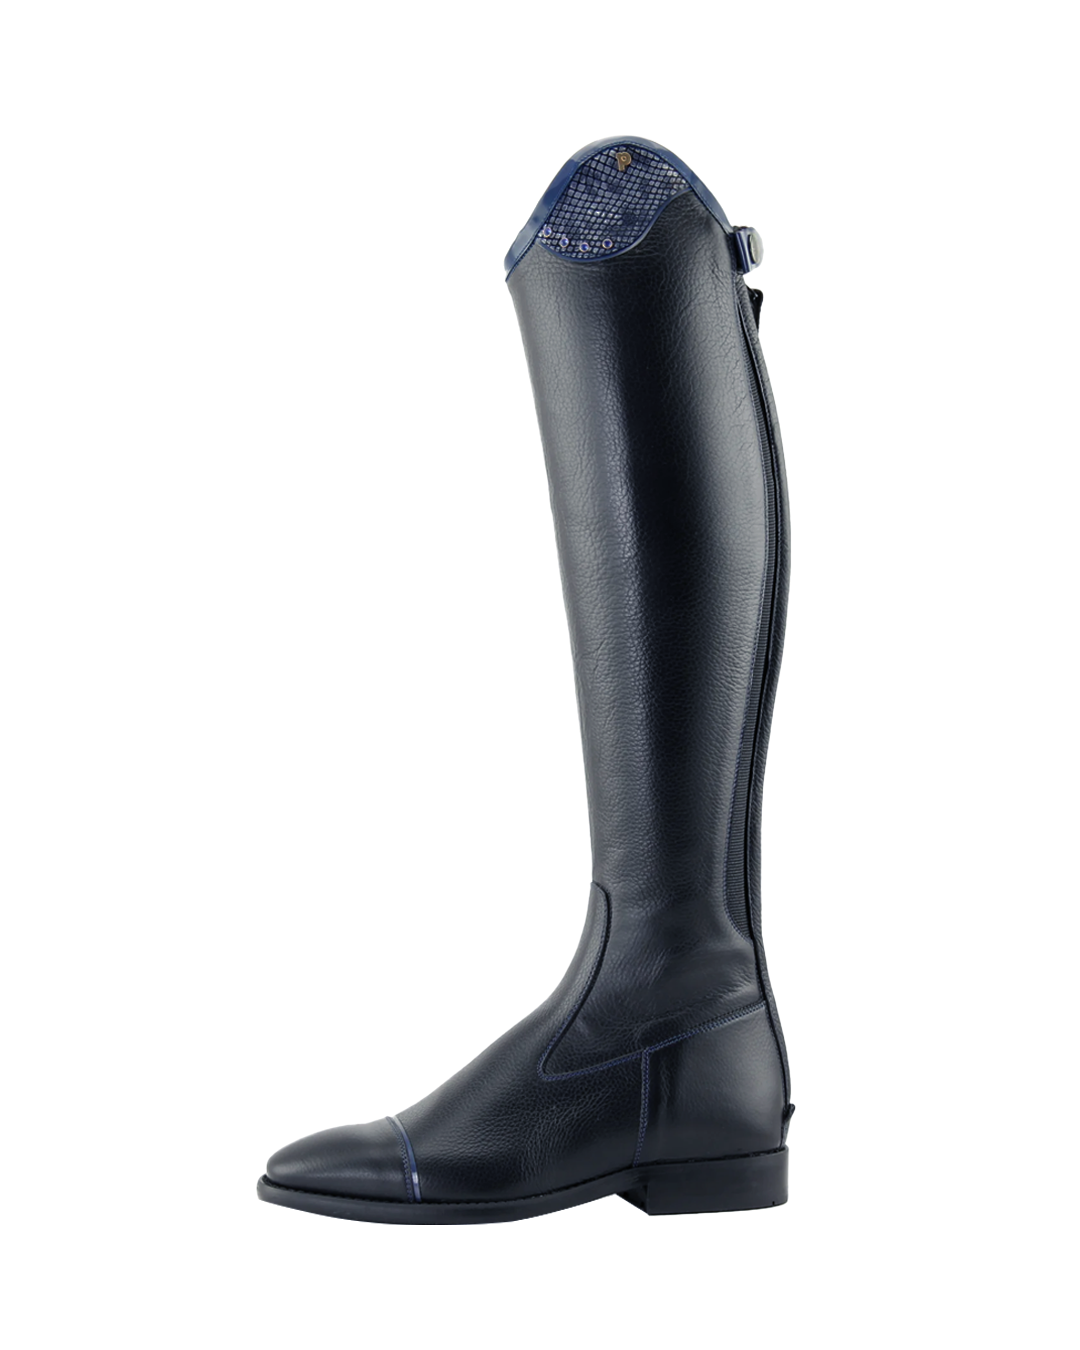 Petrie "Cinderella" Trento Riding Boot US Sz 7 Boots Petrie - Equestrian Fashion Outfitters